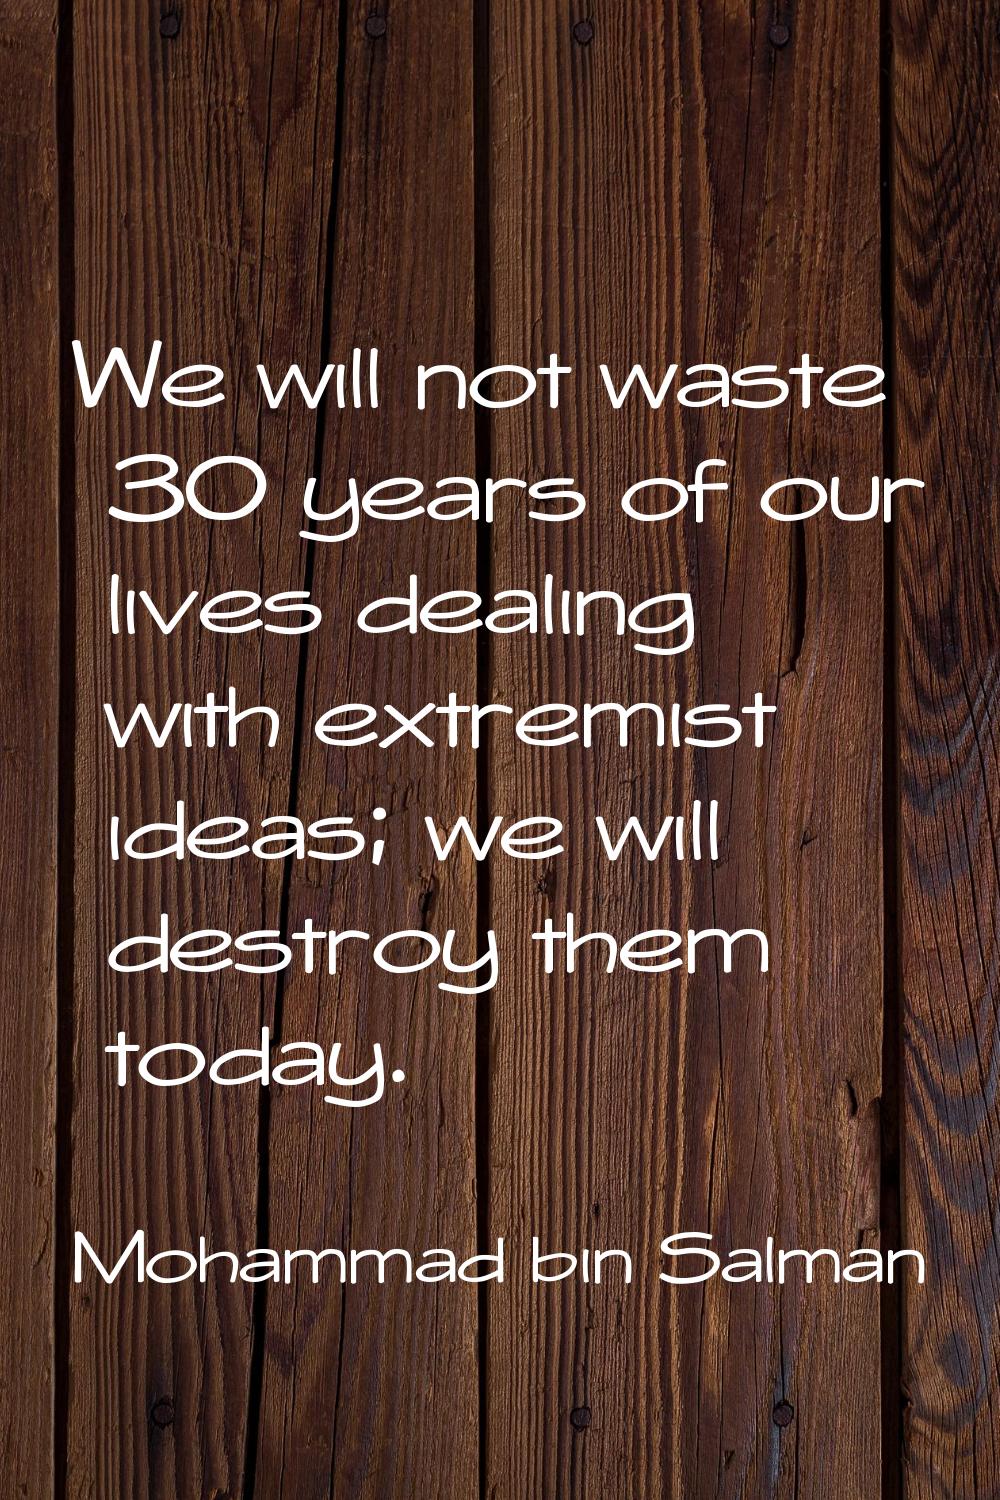 We will not waste 30 years of our lives dealing with extremist ideas; we will destroy them today.